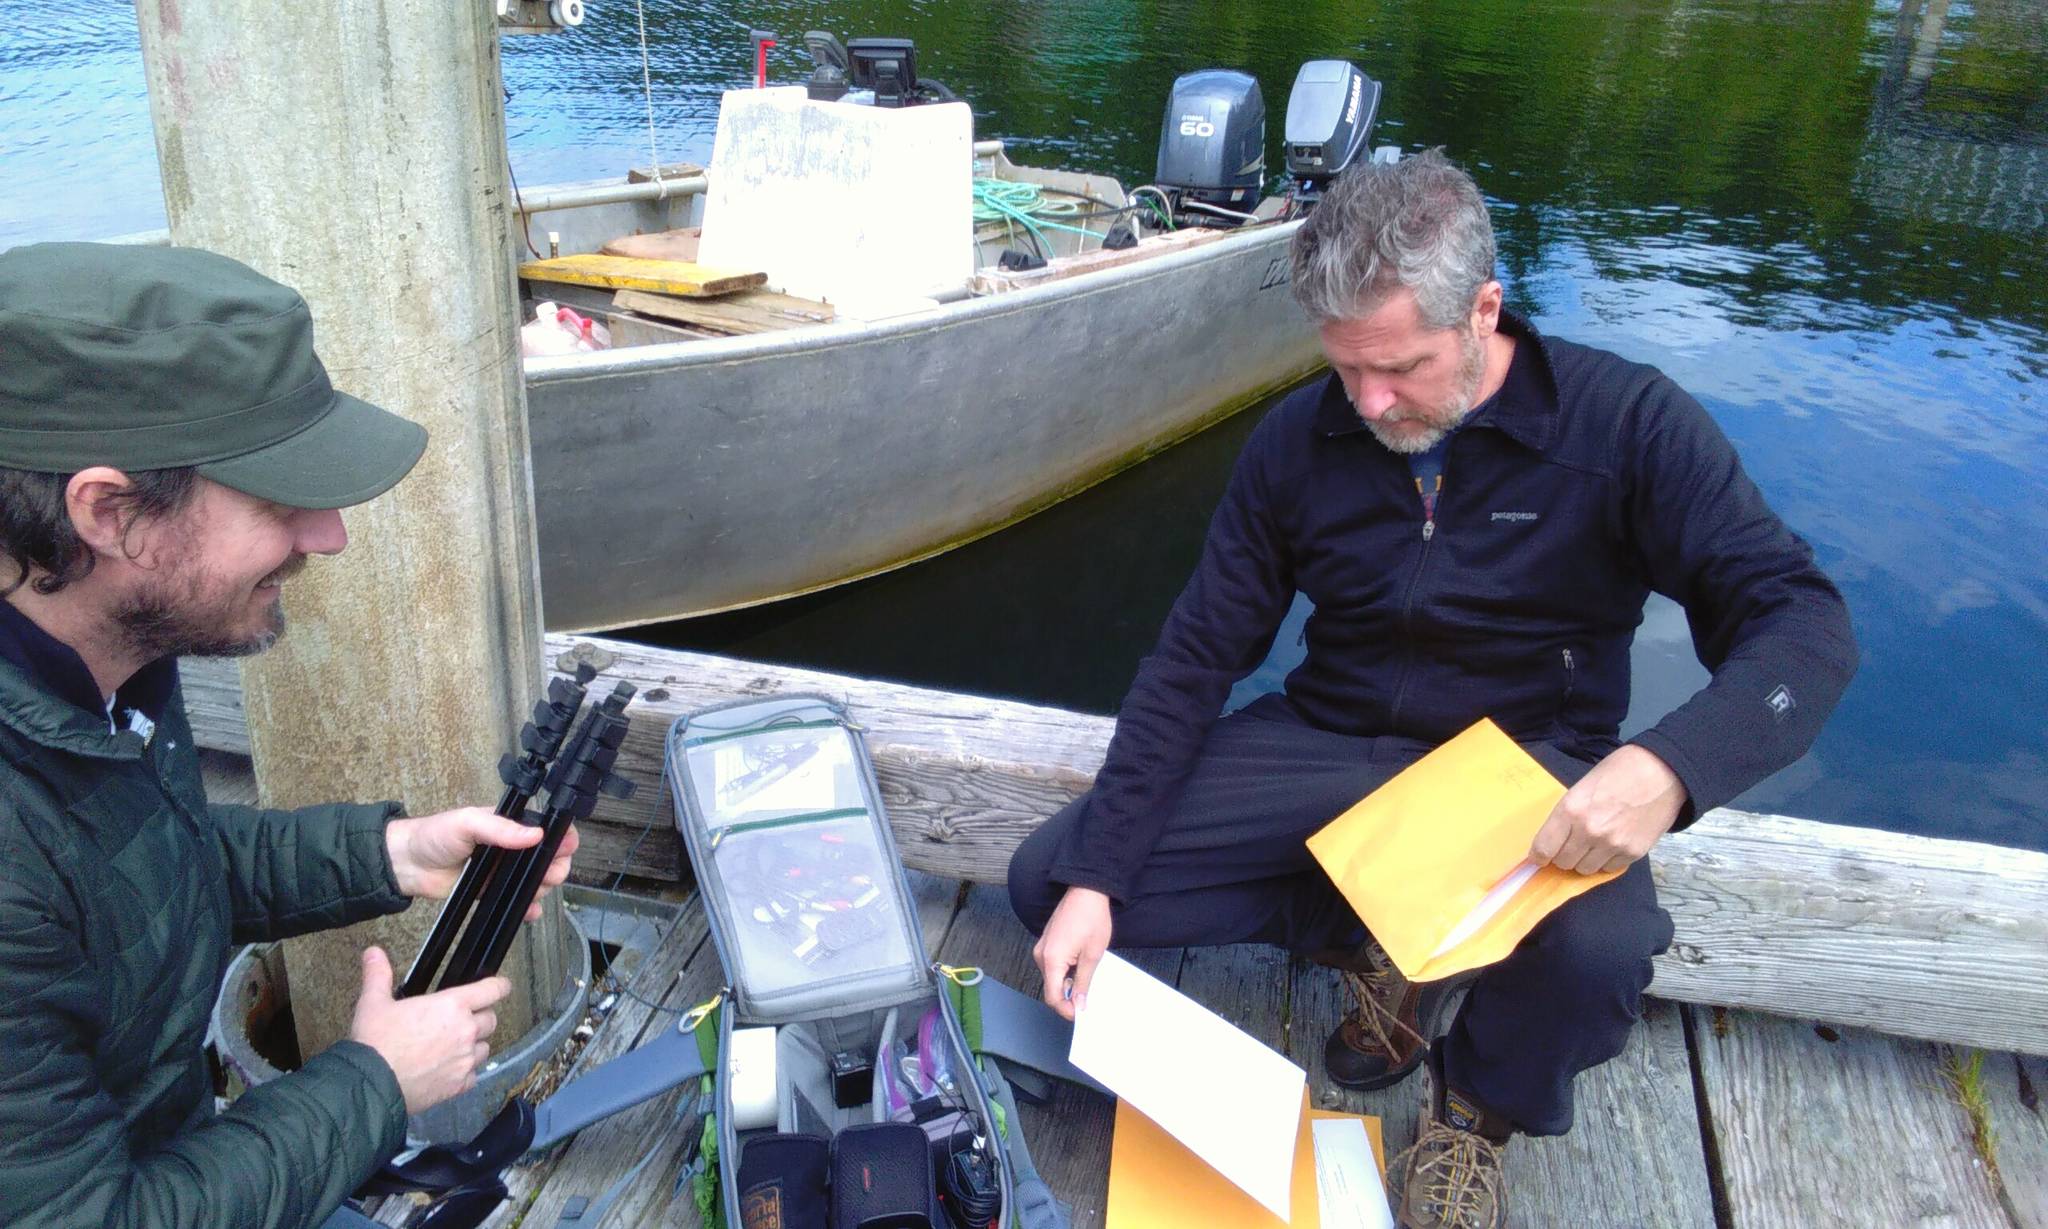 Daniel, left, packs up camera equipment and Travis, right, pulls out releases for Jamie to sign on the dock in Meyers Chuck. Tara Neilson | For the Capital City Weekly